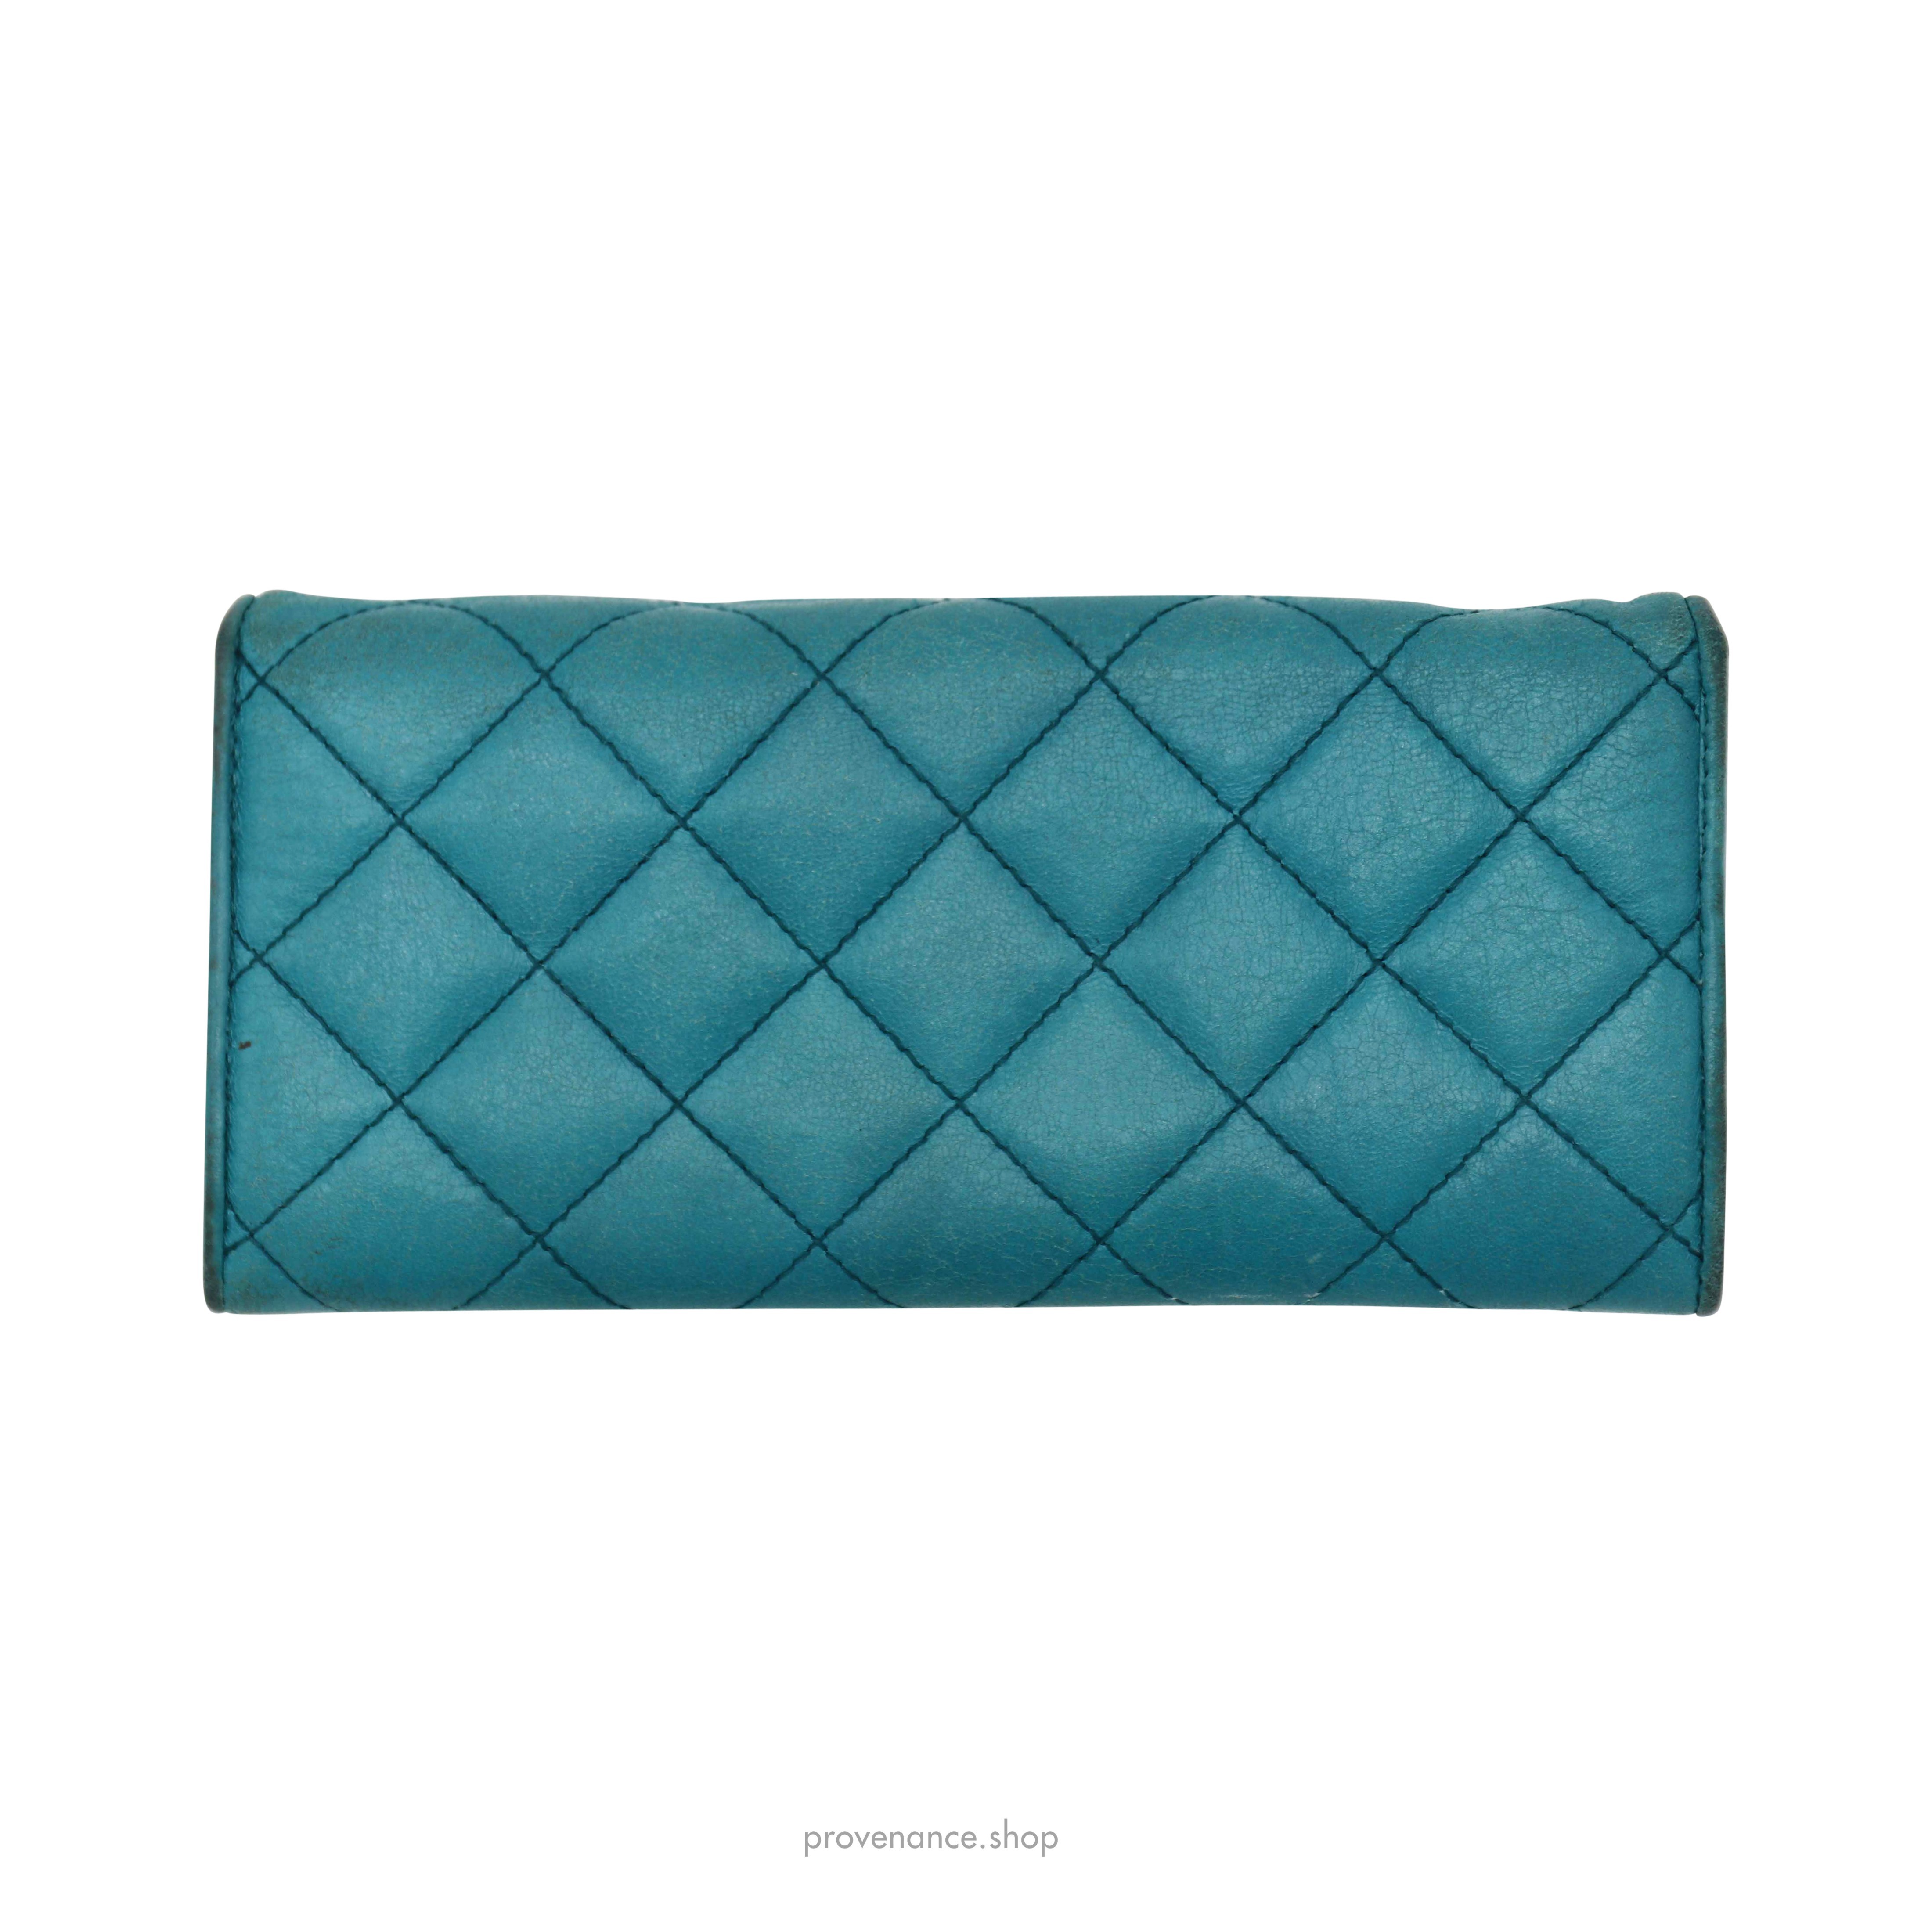 Prada Long Wallet - Quilted Blue Calfskin Leather - 2